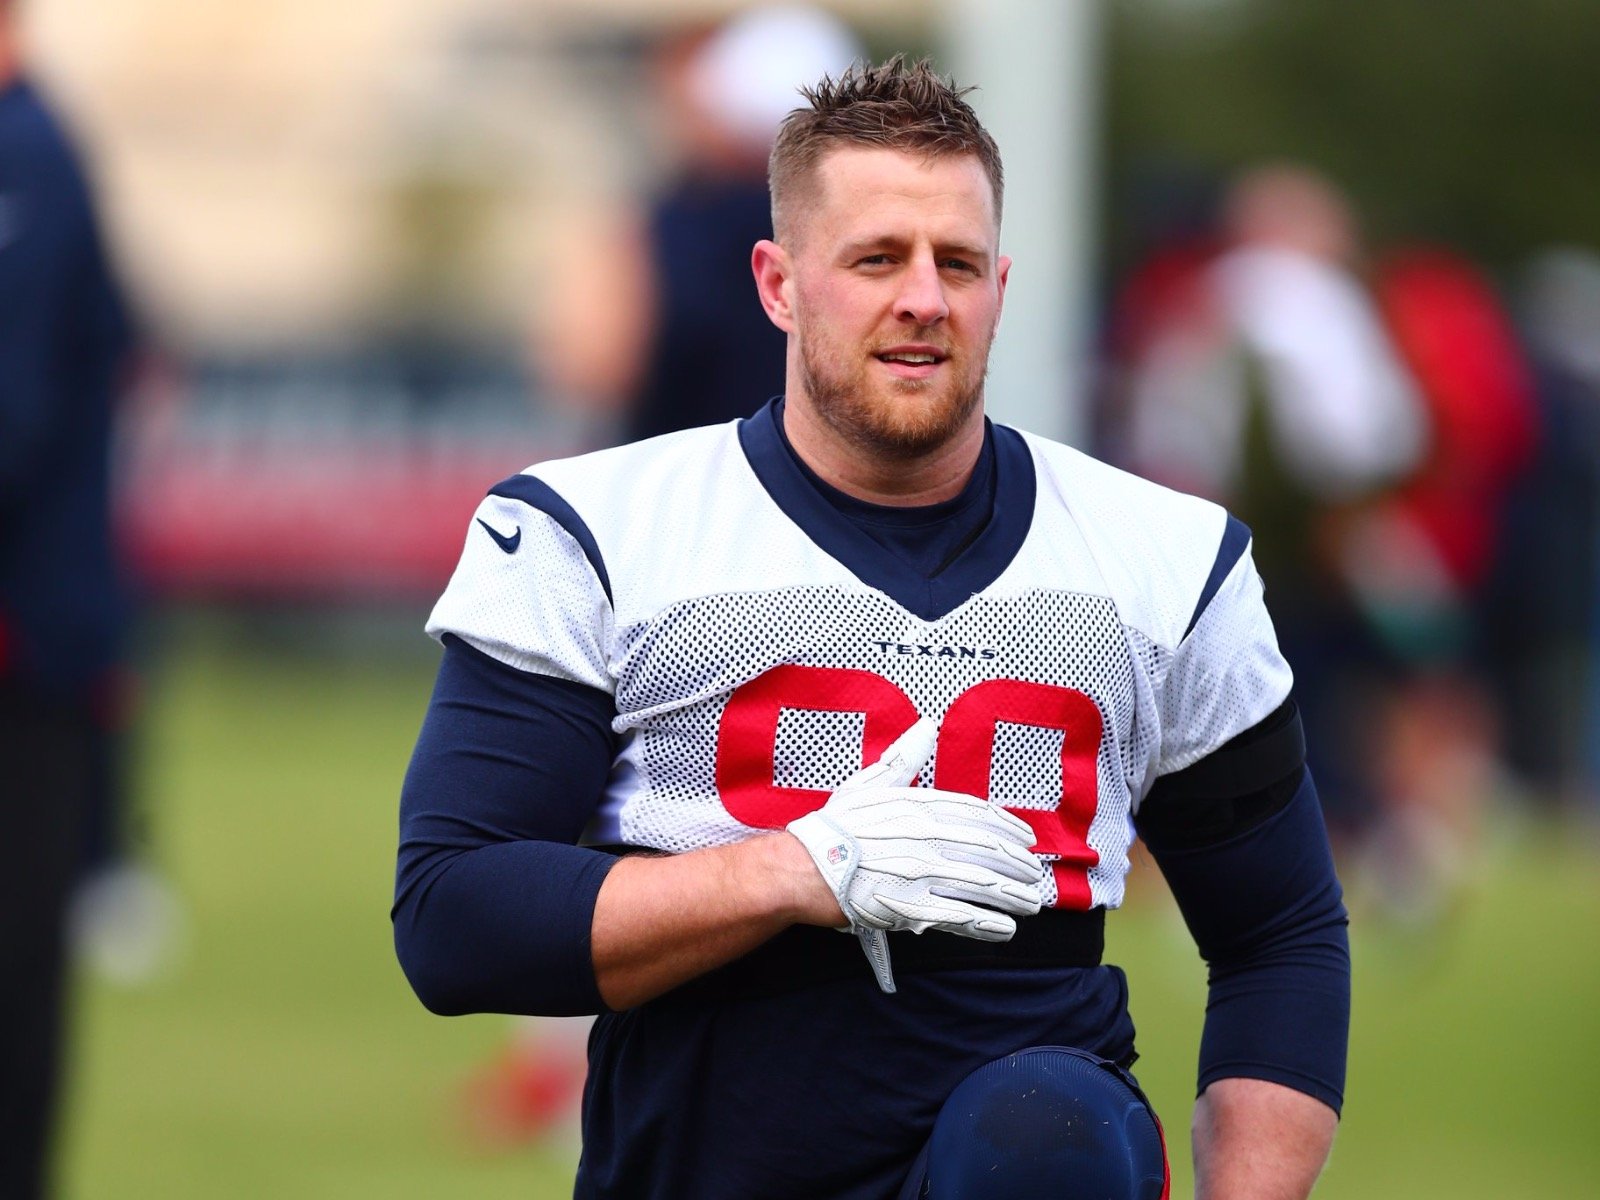 J.J. Watt to host "Saturday Night Live" in February because sure, why notThe real winners and losers of the 2022 EmmysS'aul good, S'aul goneKegel's Inn wins CBS Food Face Off for their German potato saladLocal chef to compete on new Gordon Ramsay show "Next Level Chef"